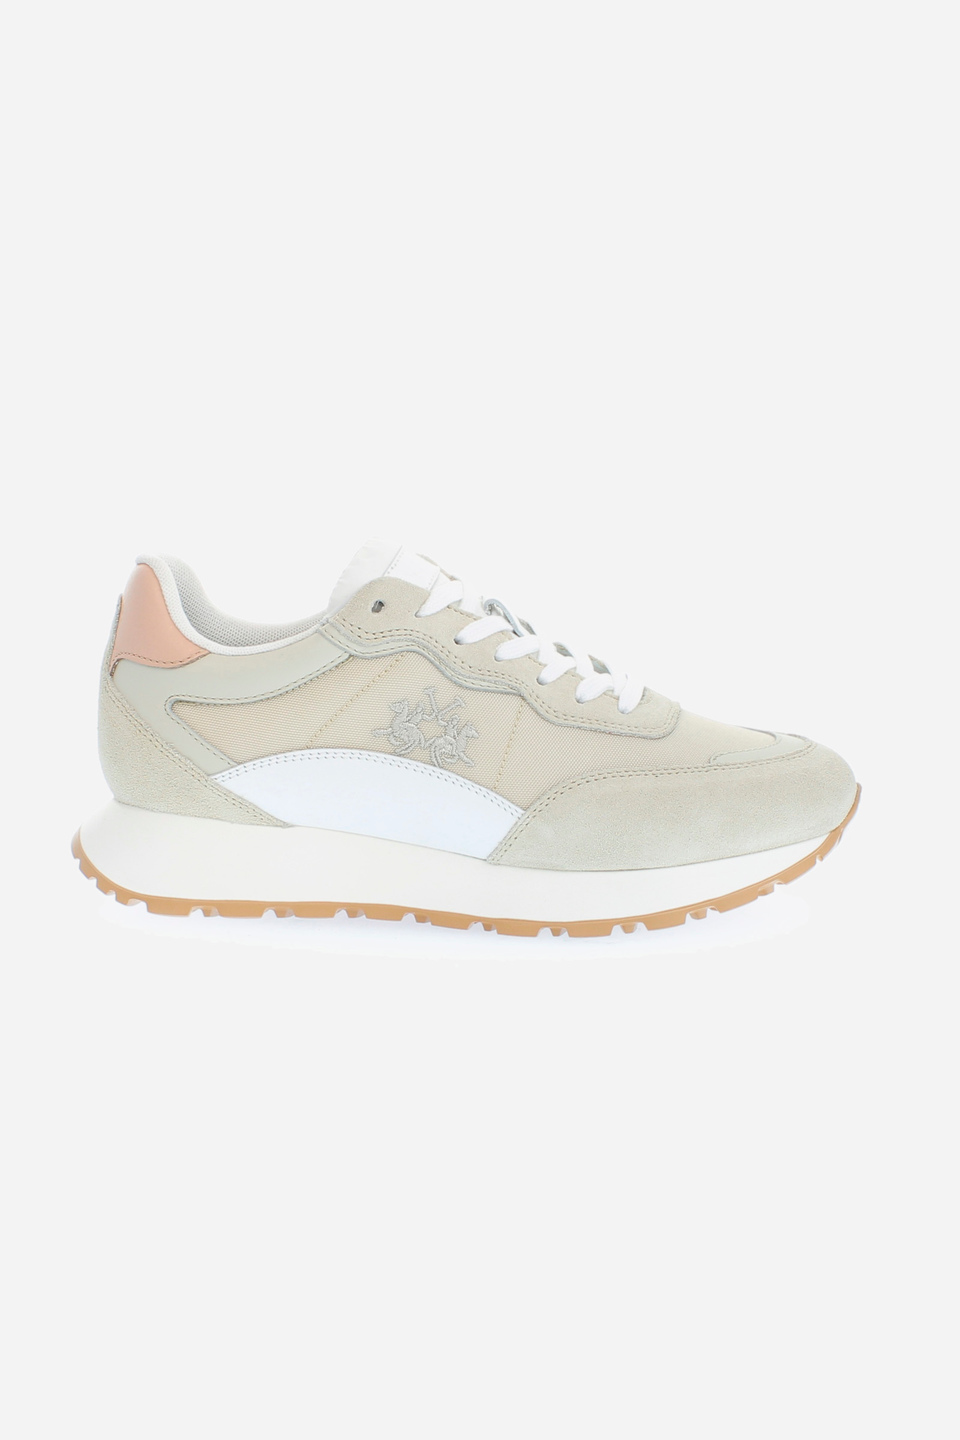 Women's leather trainers with inserts | La Martina - Official Online Shop